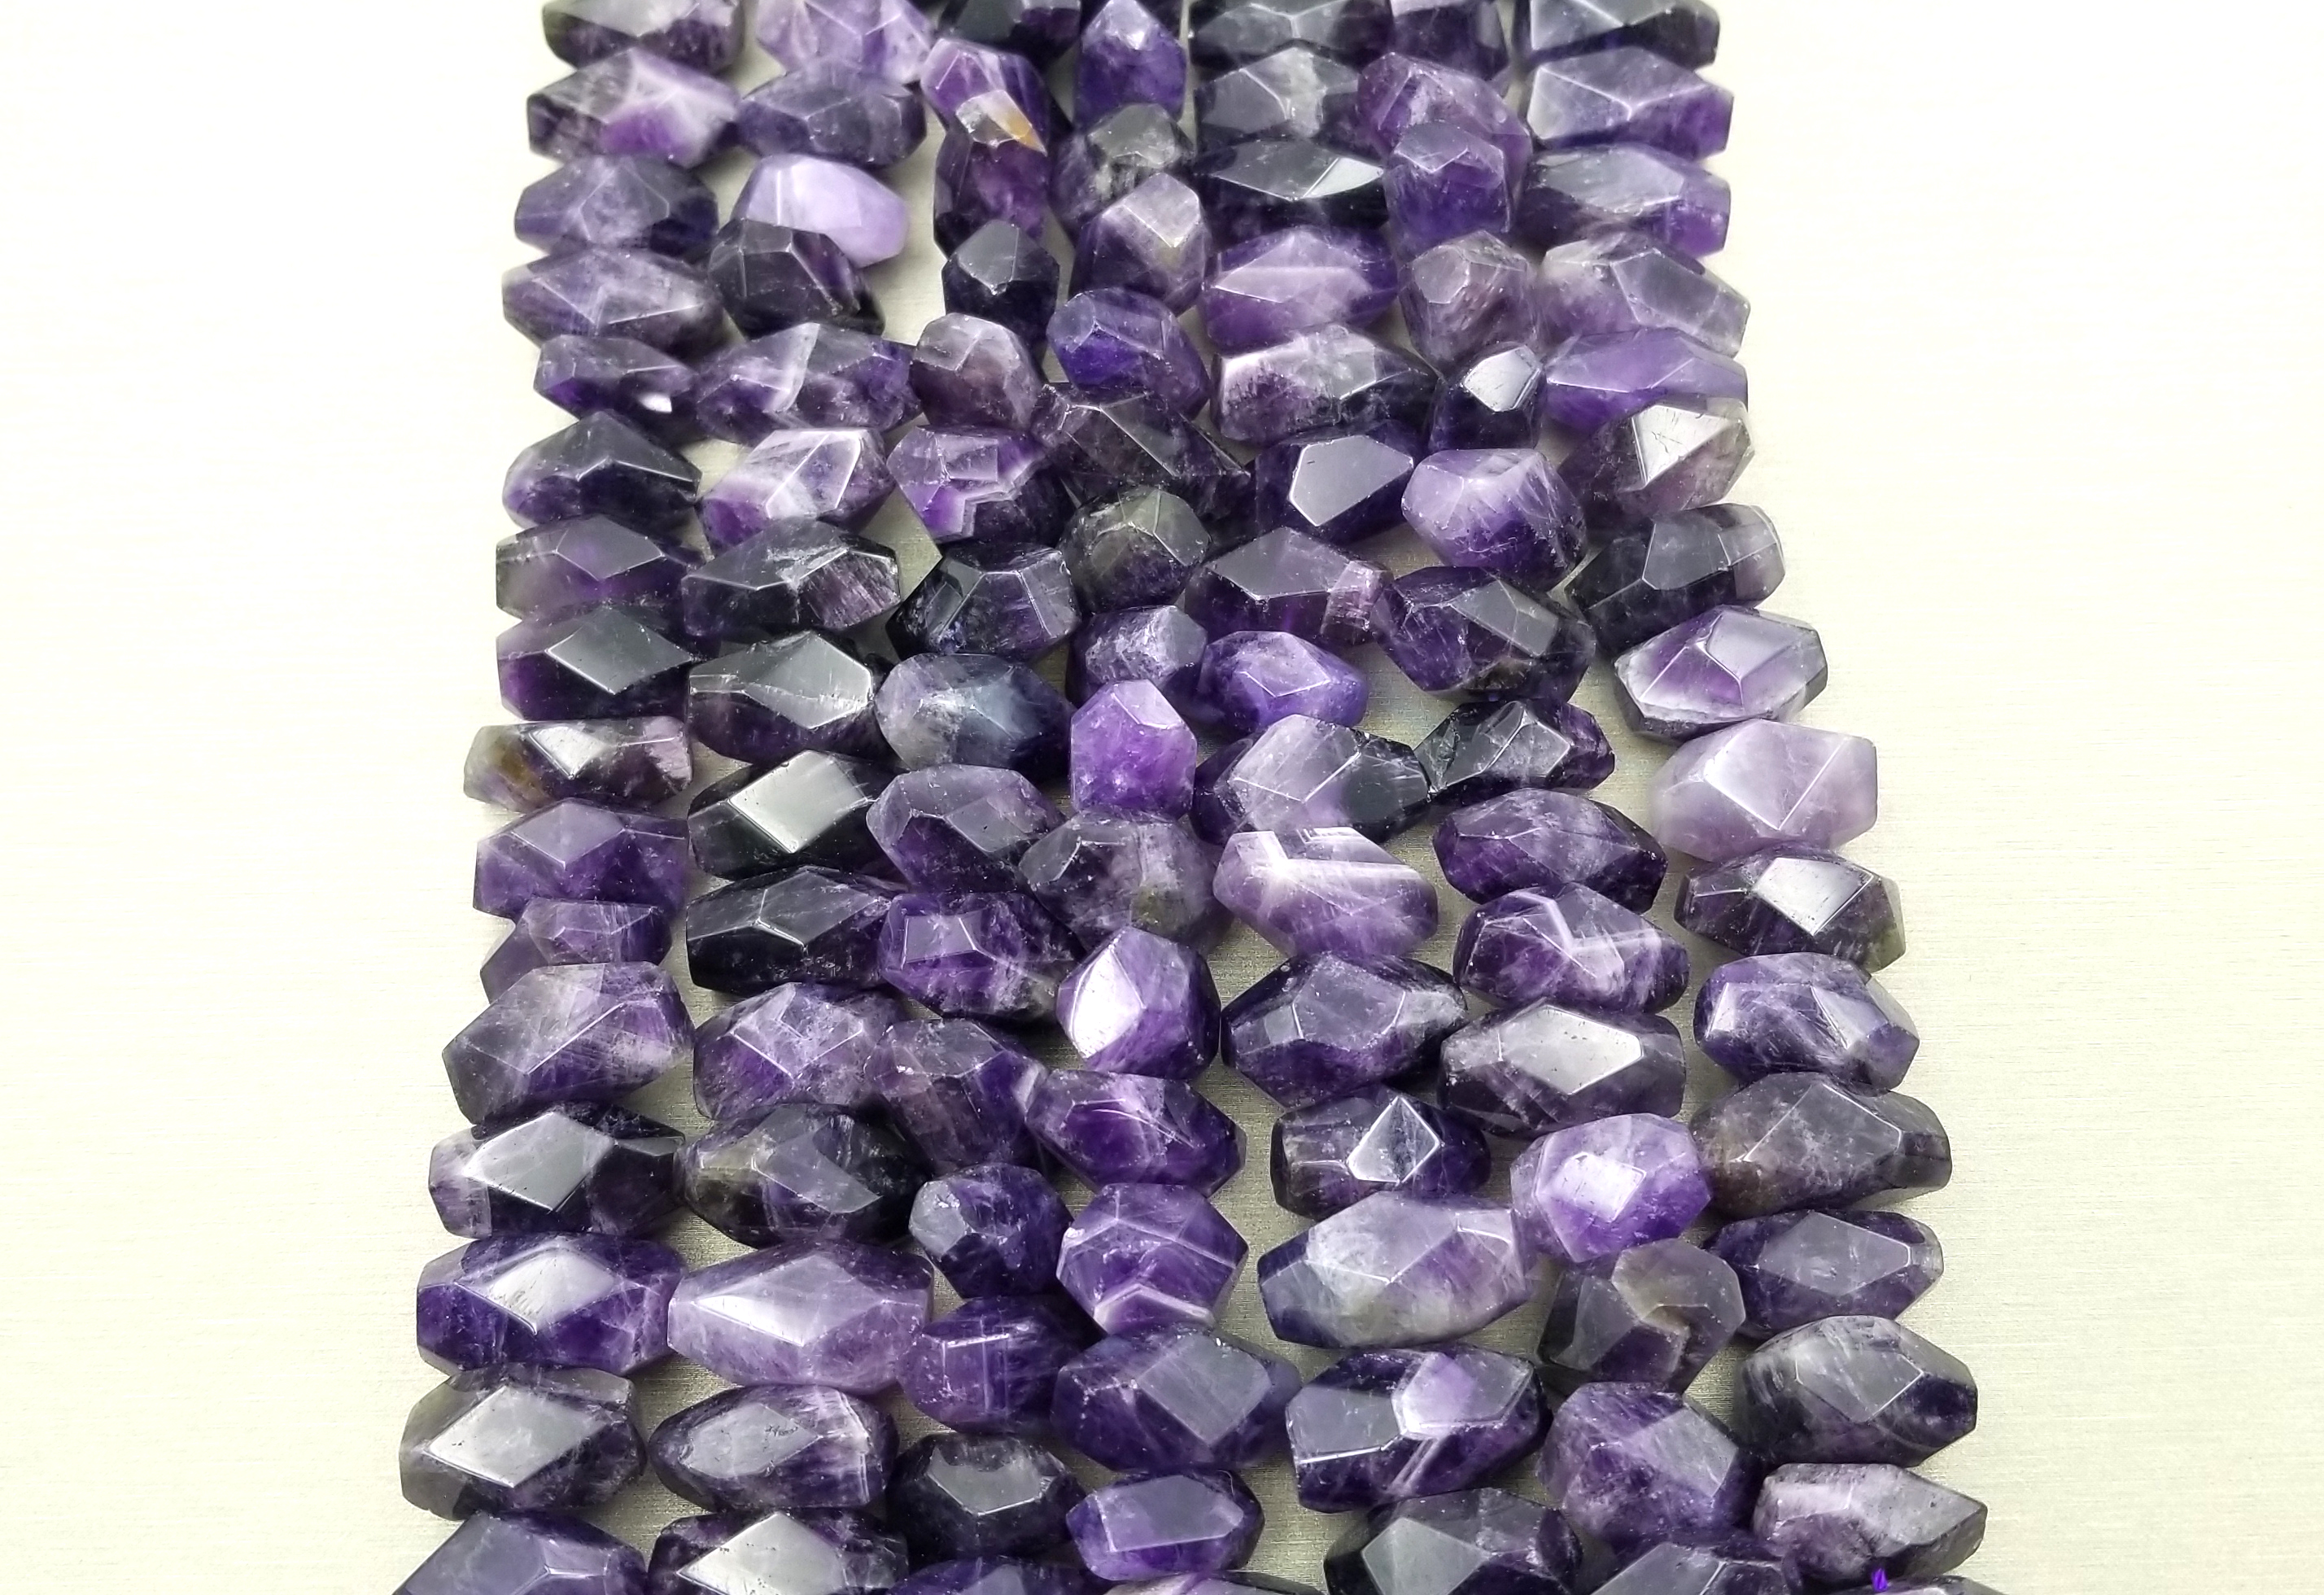 4mm AAA Natural Purple Amethyst Gemstone Beads,Round Loose Bead,15 Inches Full Strand